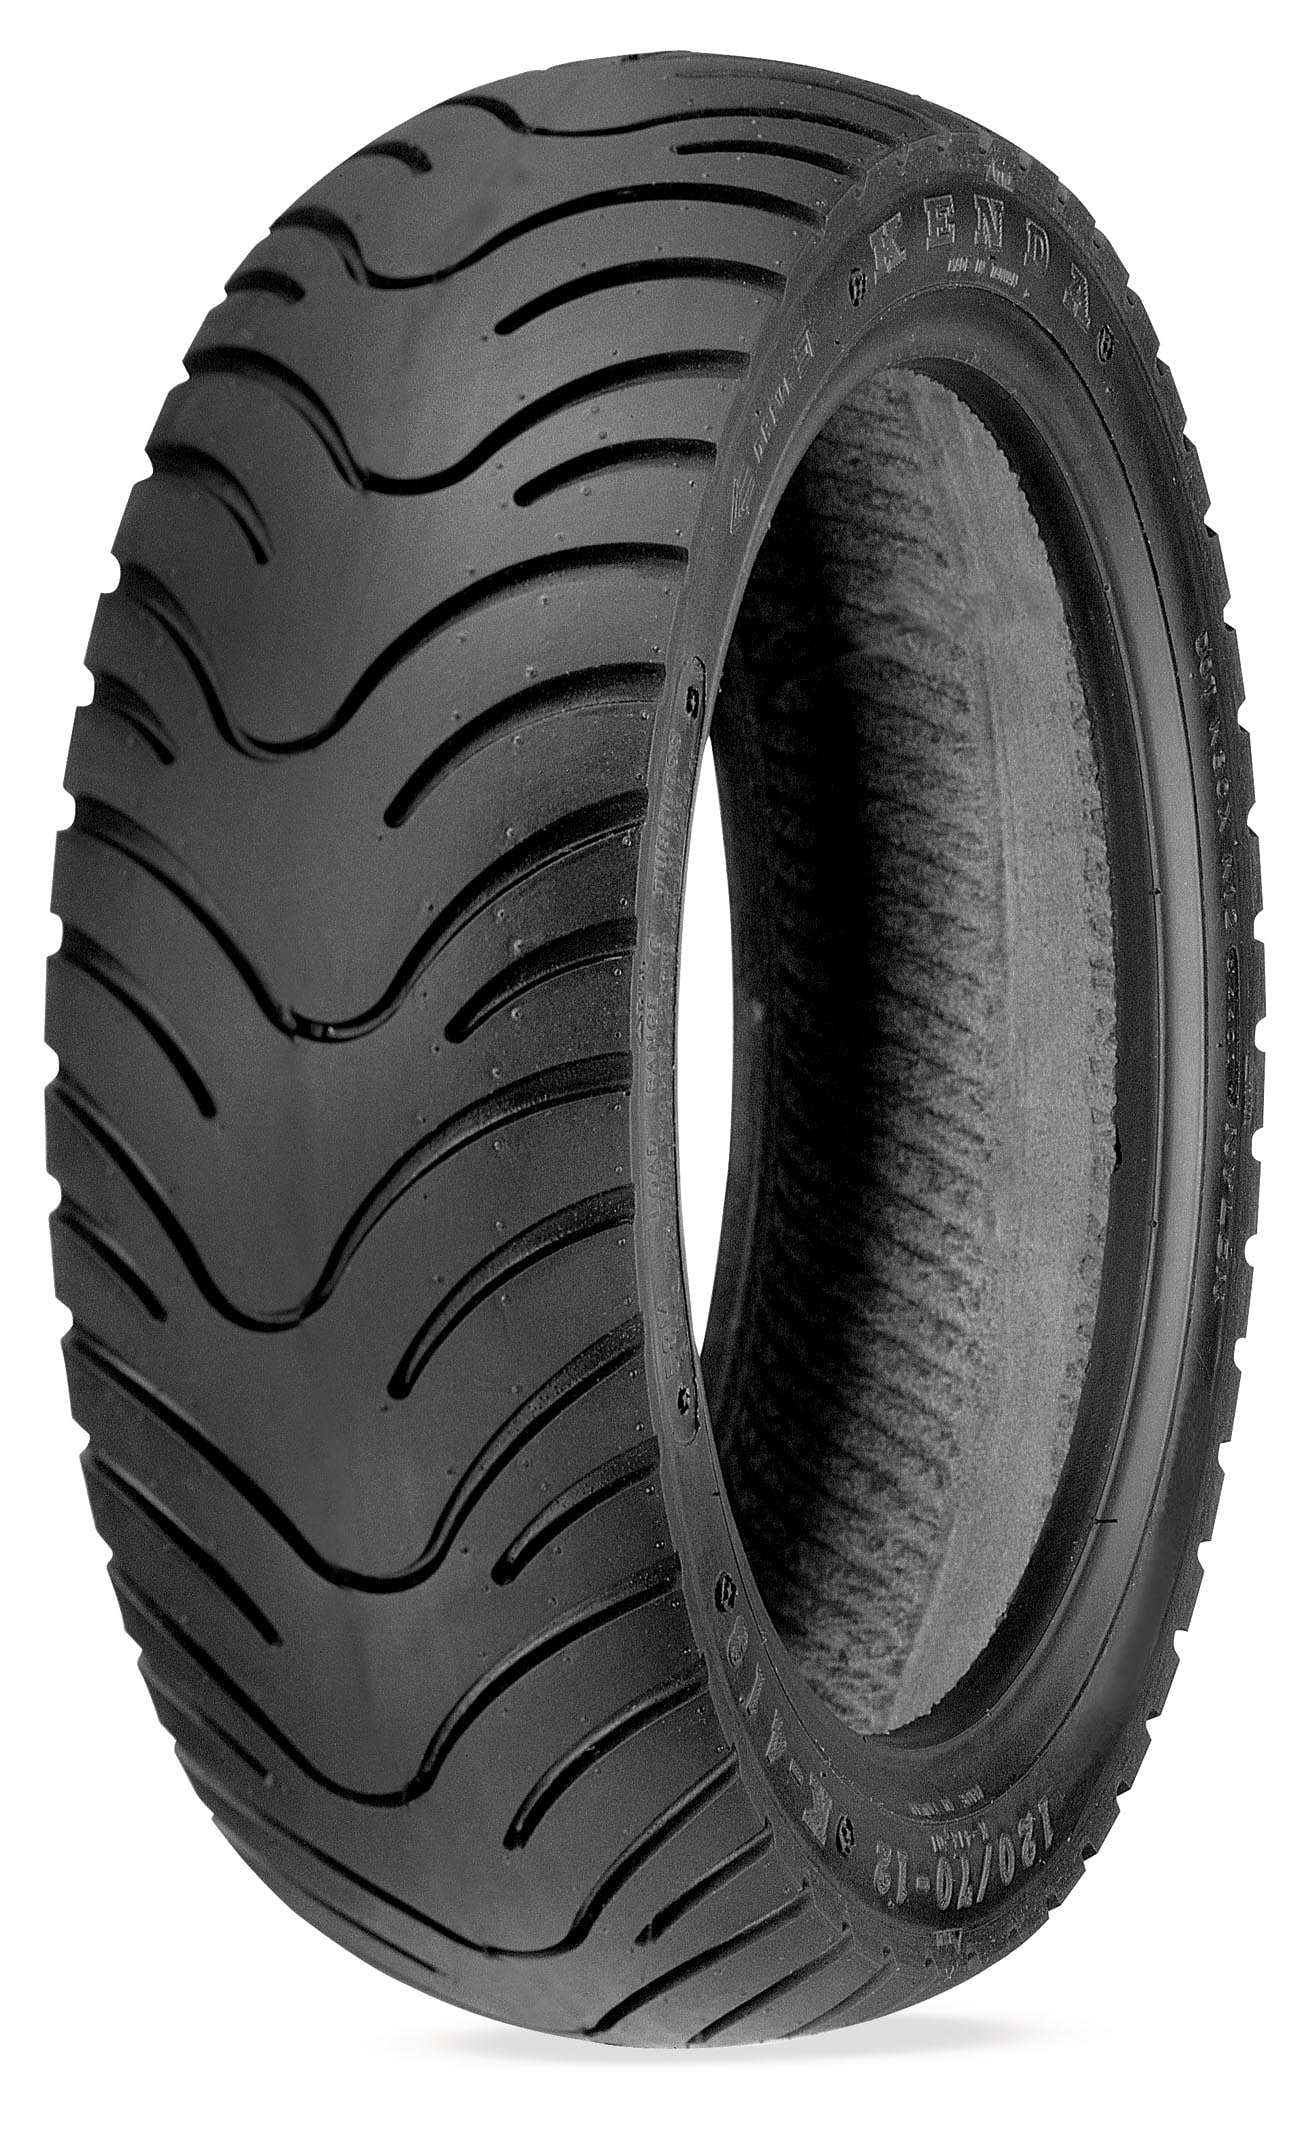 Kenda Tires K413 120/90-10 Front/Rear Scooter Tire 044131012B1 